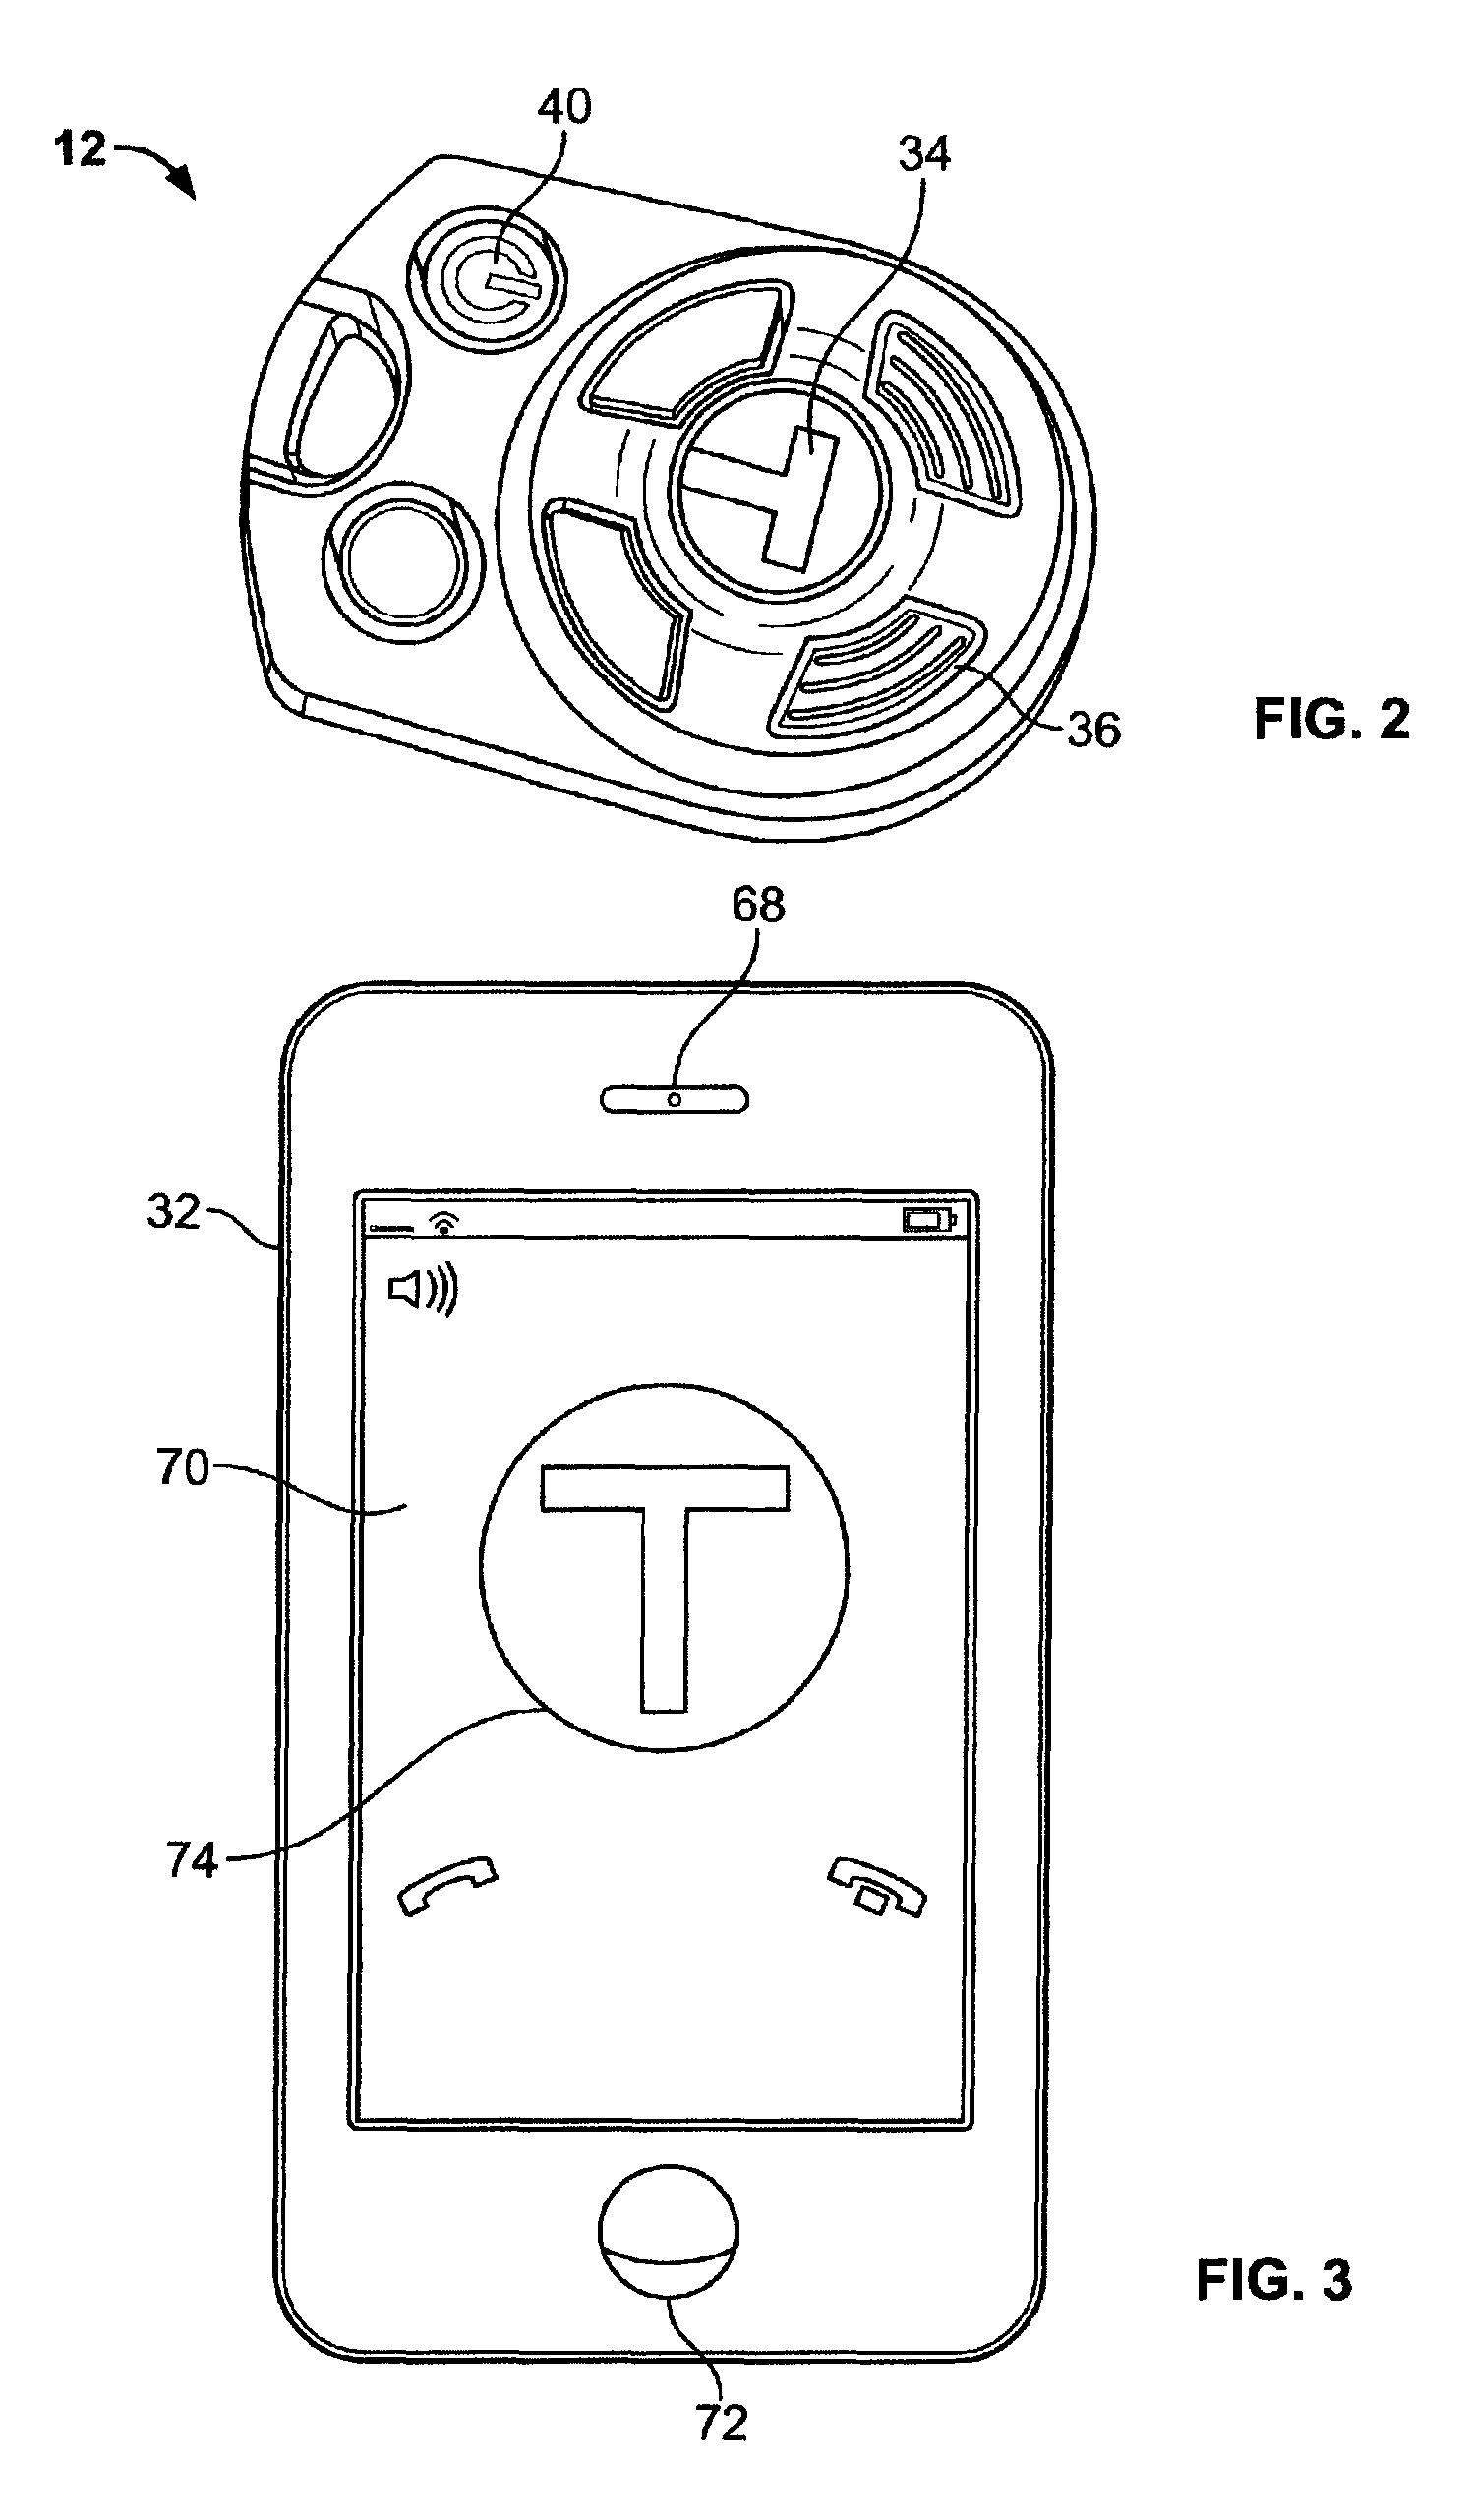 System and method for identifying, providing, and presenting content on a mobile device